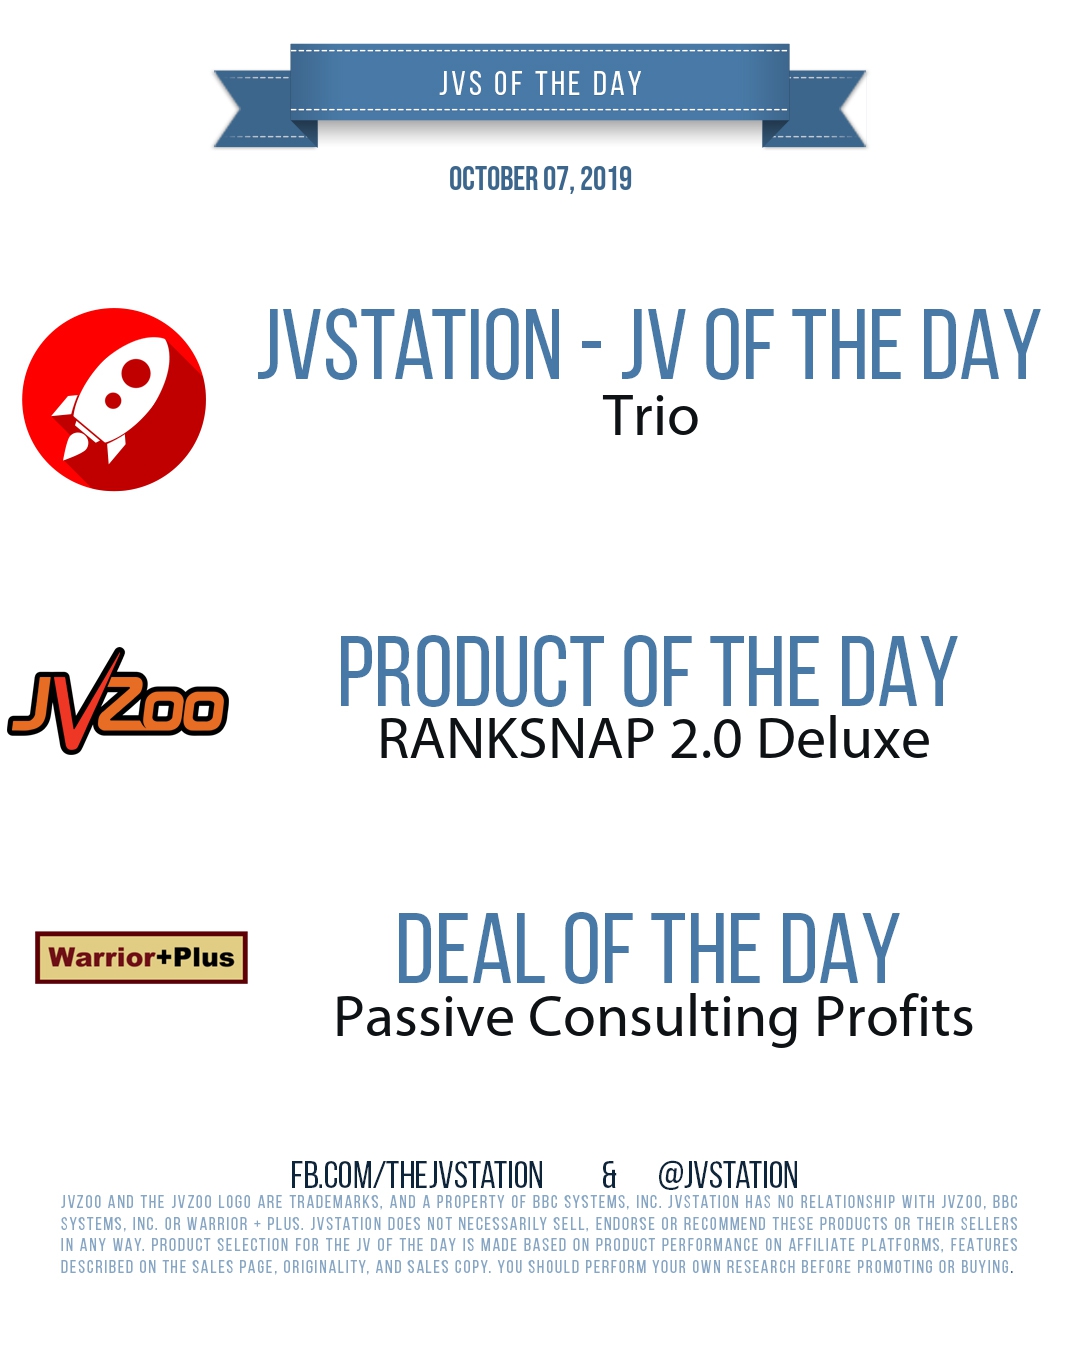 JVs of the day - October 07, 2019